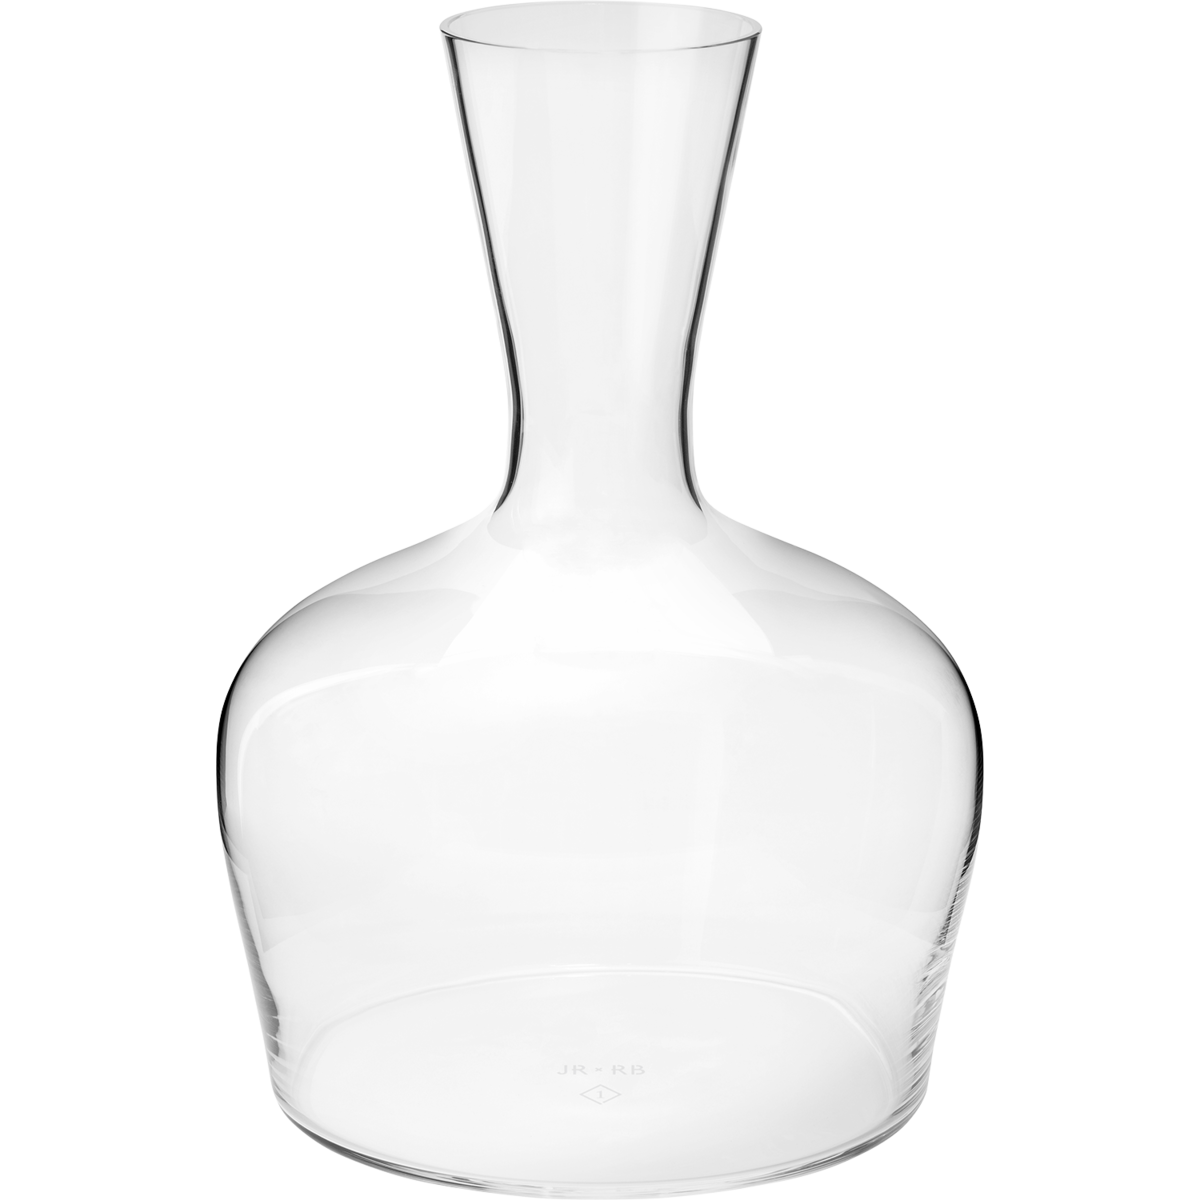 The Jancis Robinson Young wine decanter